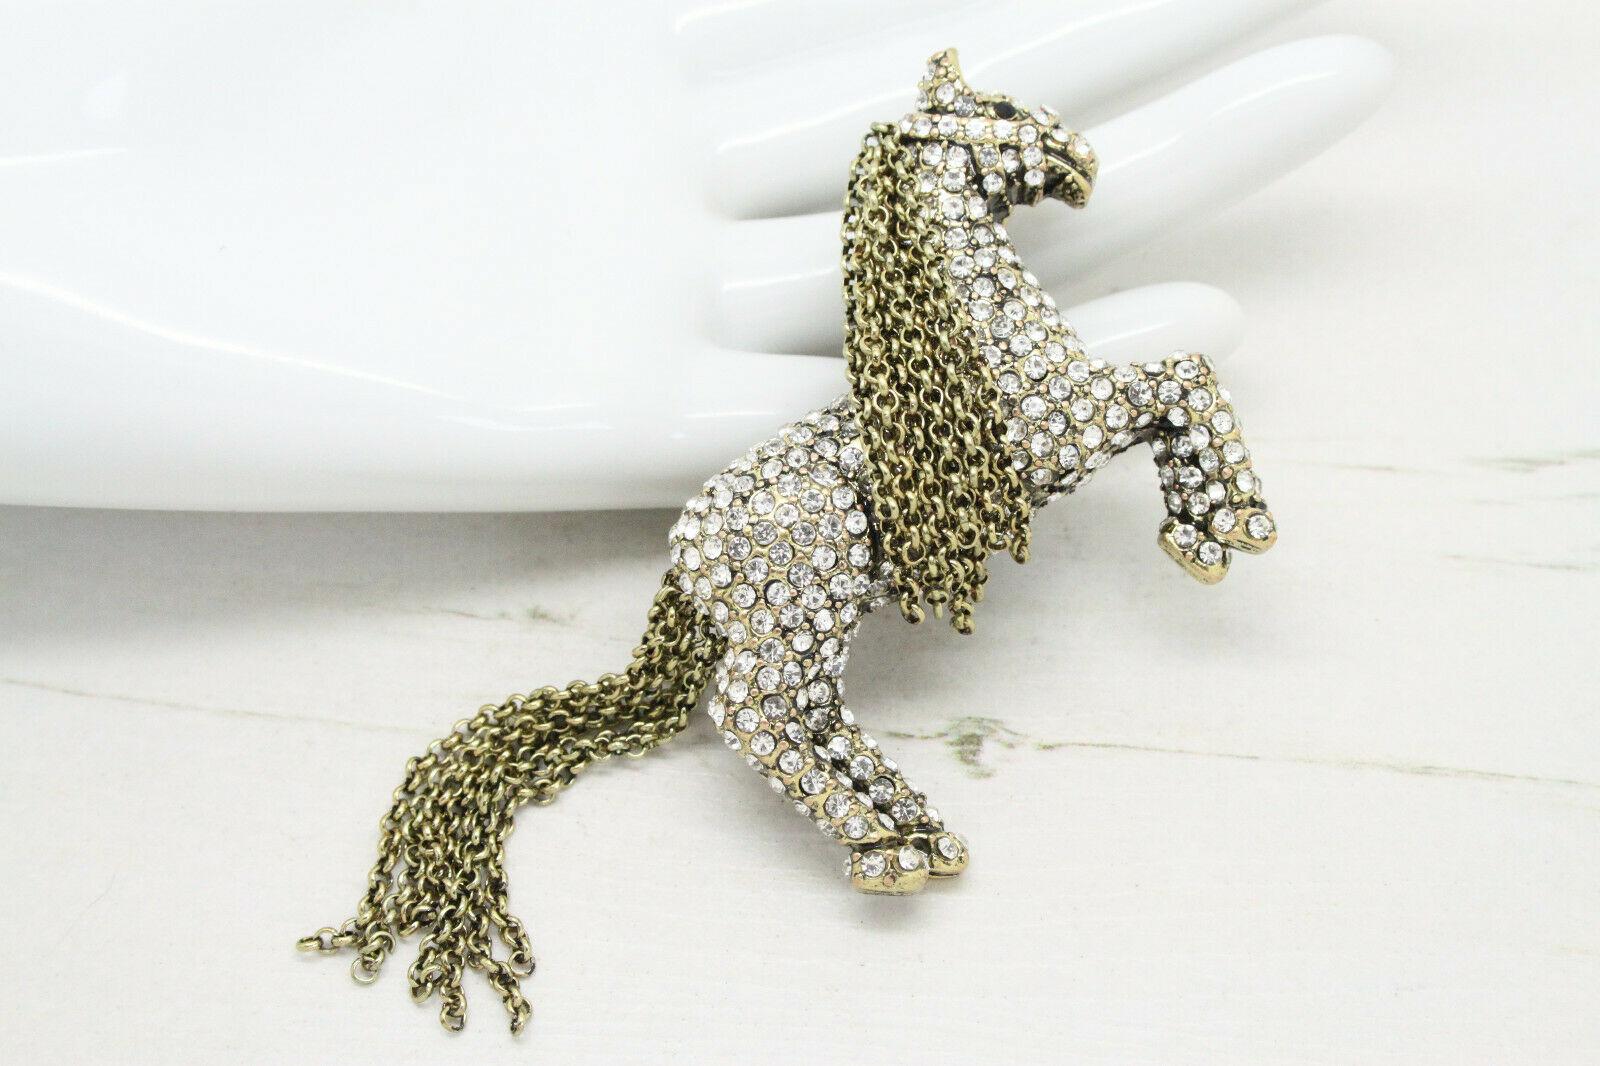 Chic and Dramatic, highly detailed Signed HEIDI DAUS Pony Tally Ho Horse design brooch encrusted with pave-set sparkling Crystals. Mane and Tail composed of multi strands of free falling chain. Antique gold tone setting. Measuring approx. 2.6